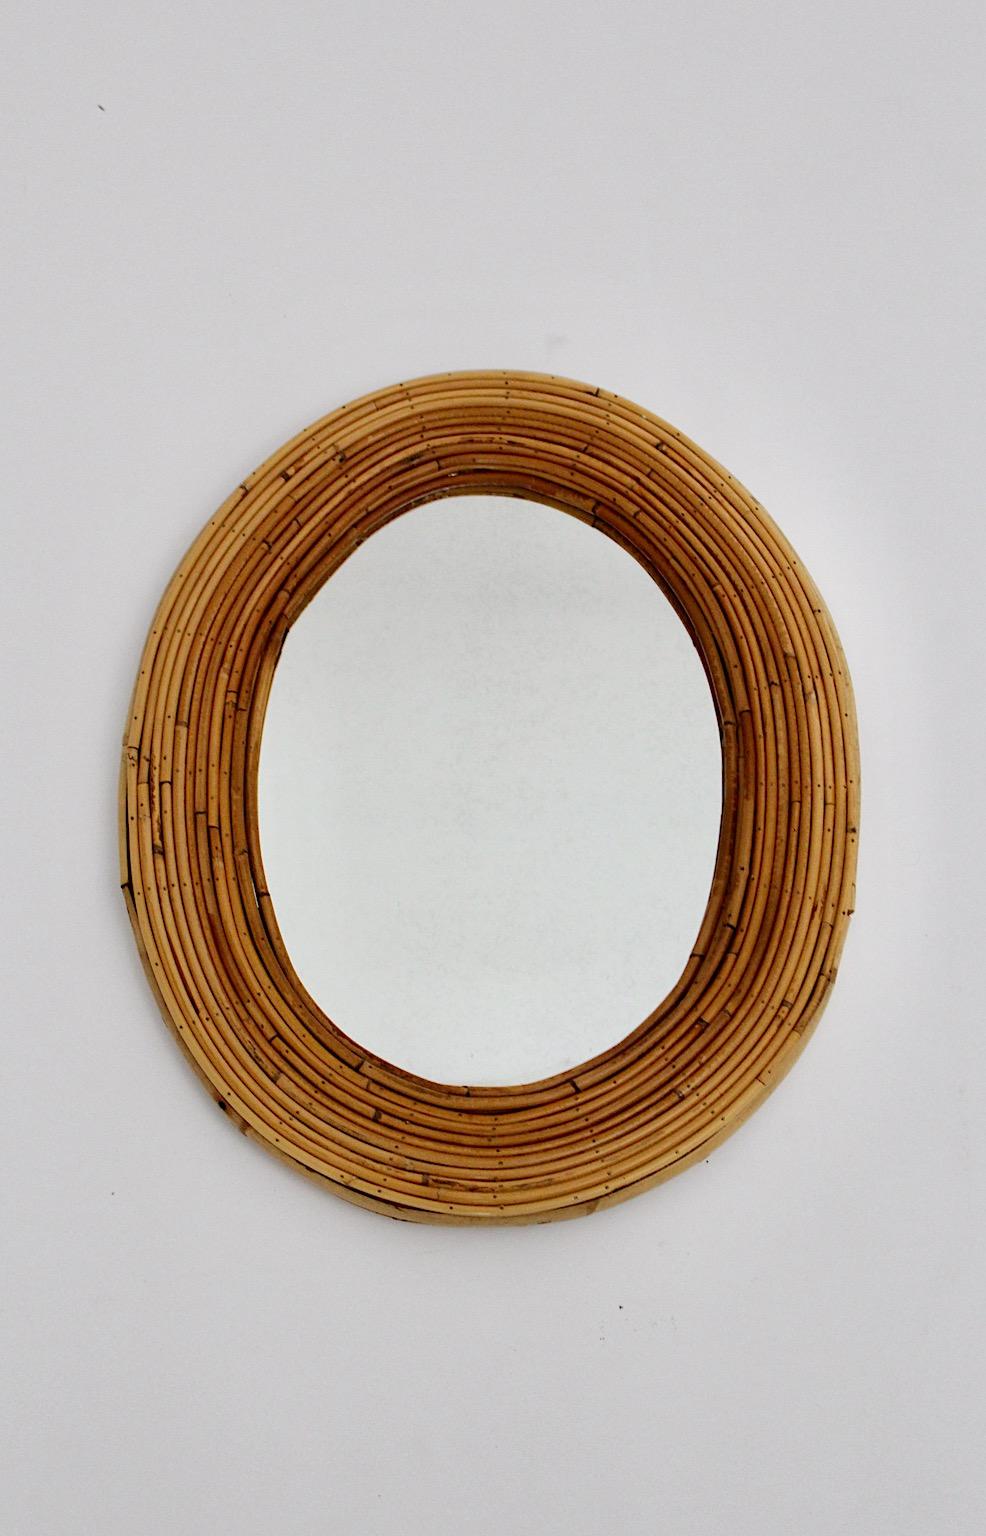 Riviera style vintage organic oval like wall mirror from rattan bamboo France 1950s.
The stunning oval wall mirror glass is framed with rattan bamboo wickerwork.
Very good condition, the rattan work shows through its organic material slightly